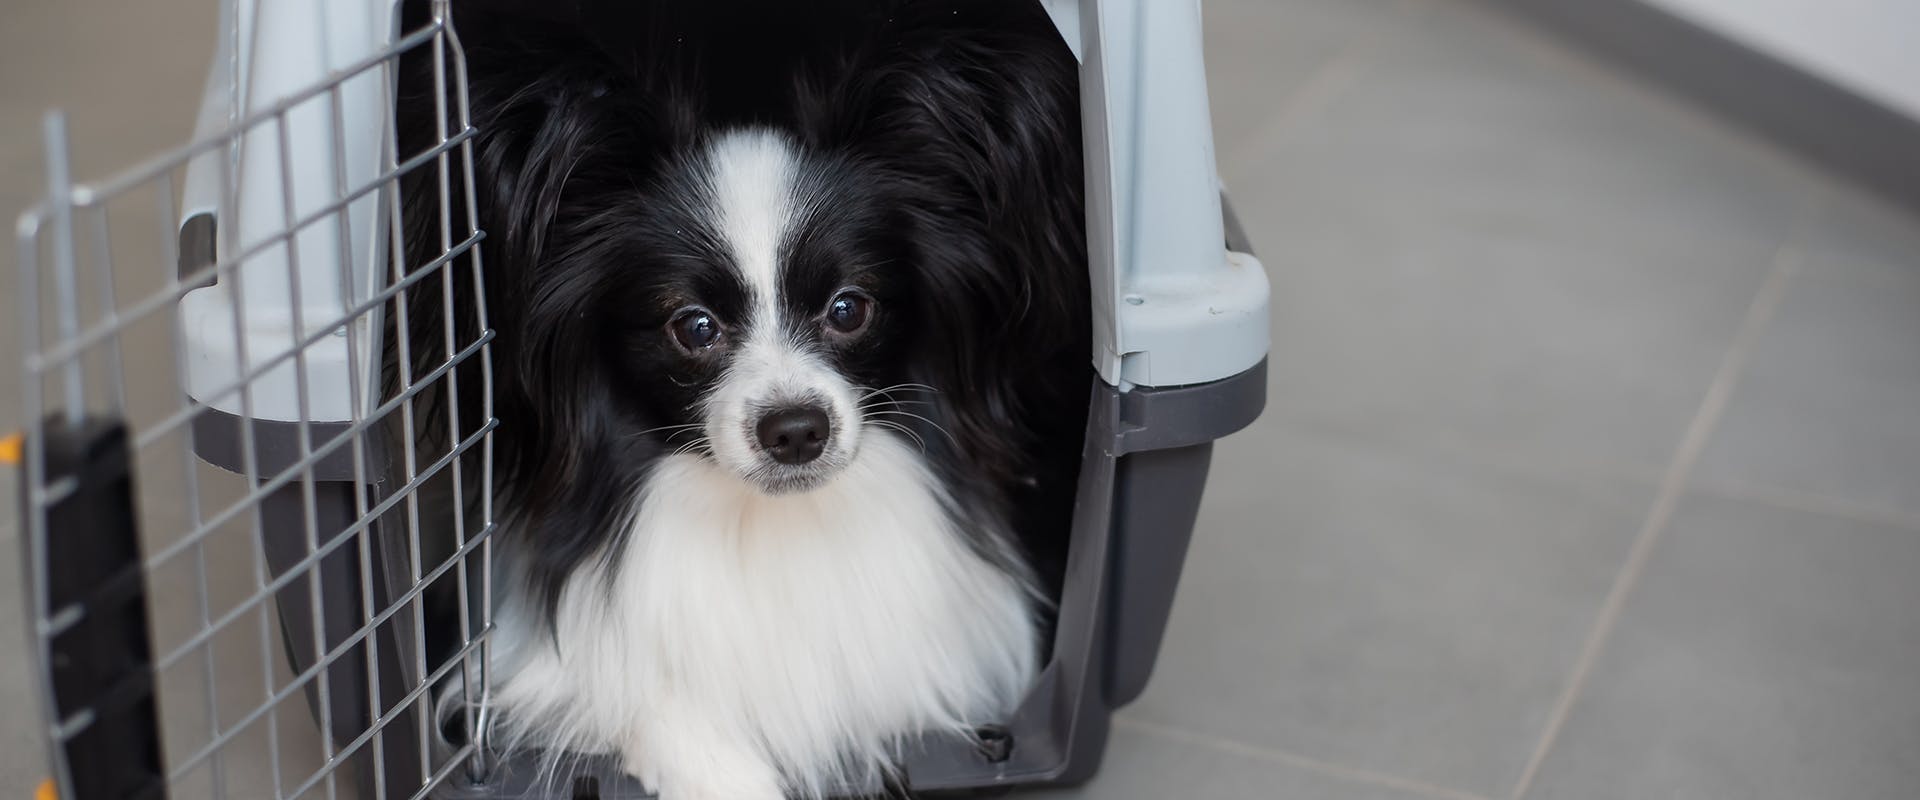 A small dog sitting in a travel crate for dogs